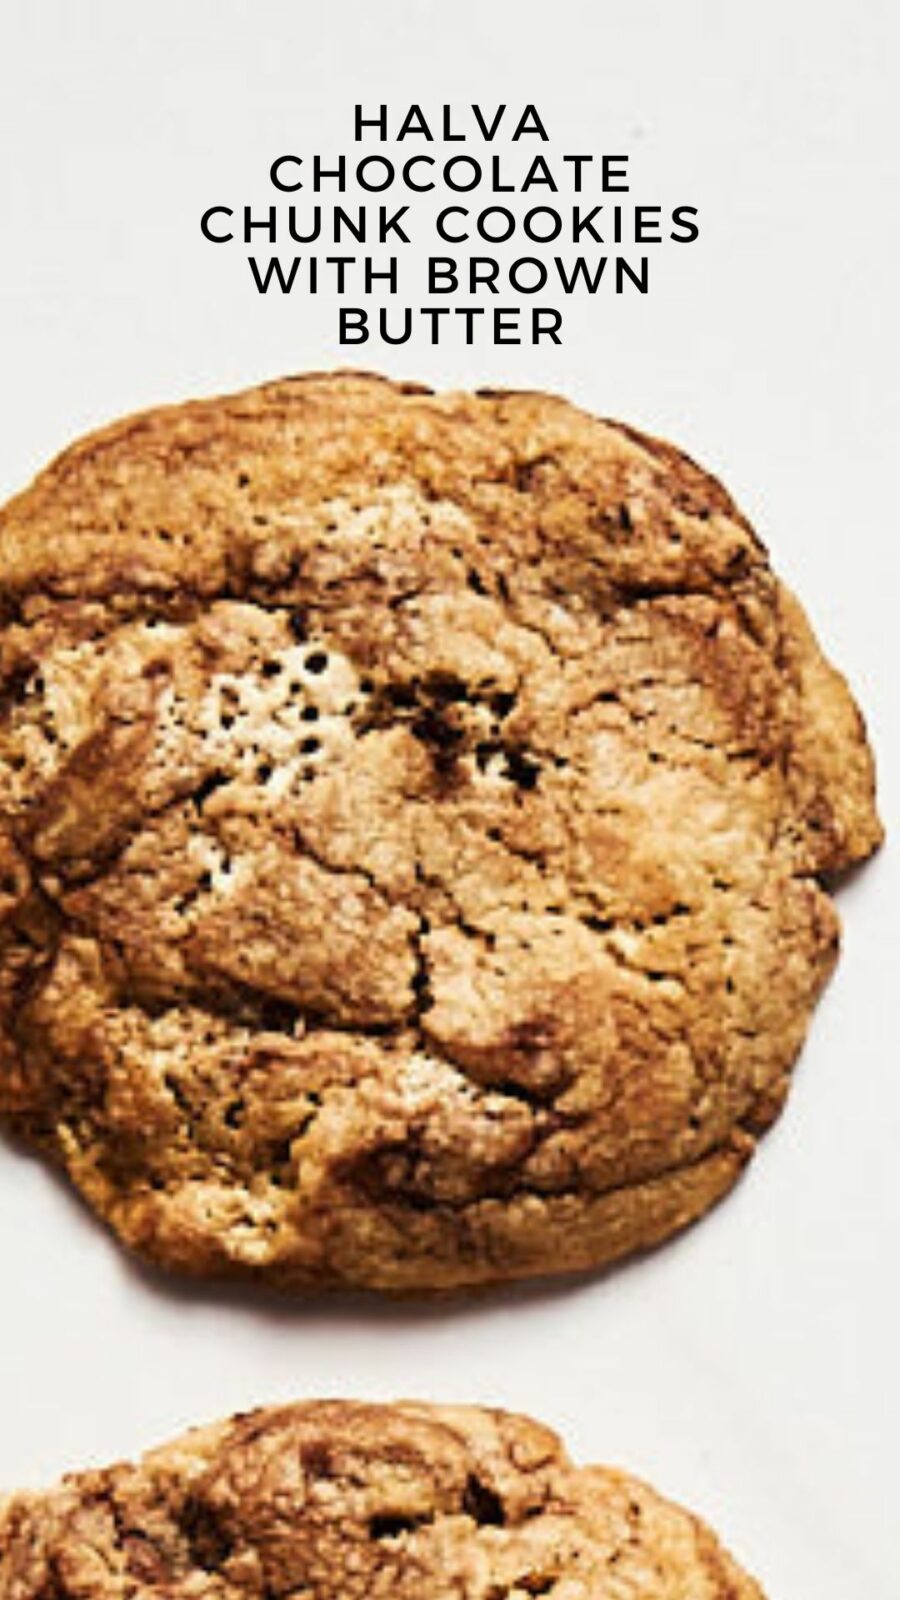 Halva chocolate Chunk cookies with Brown Butter by bayevskitchen.com